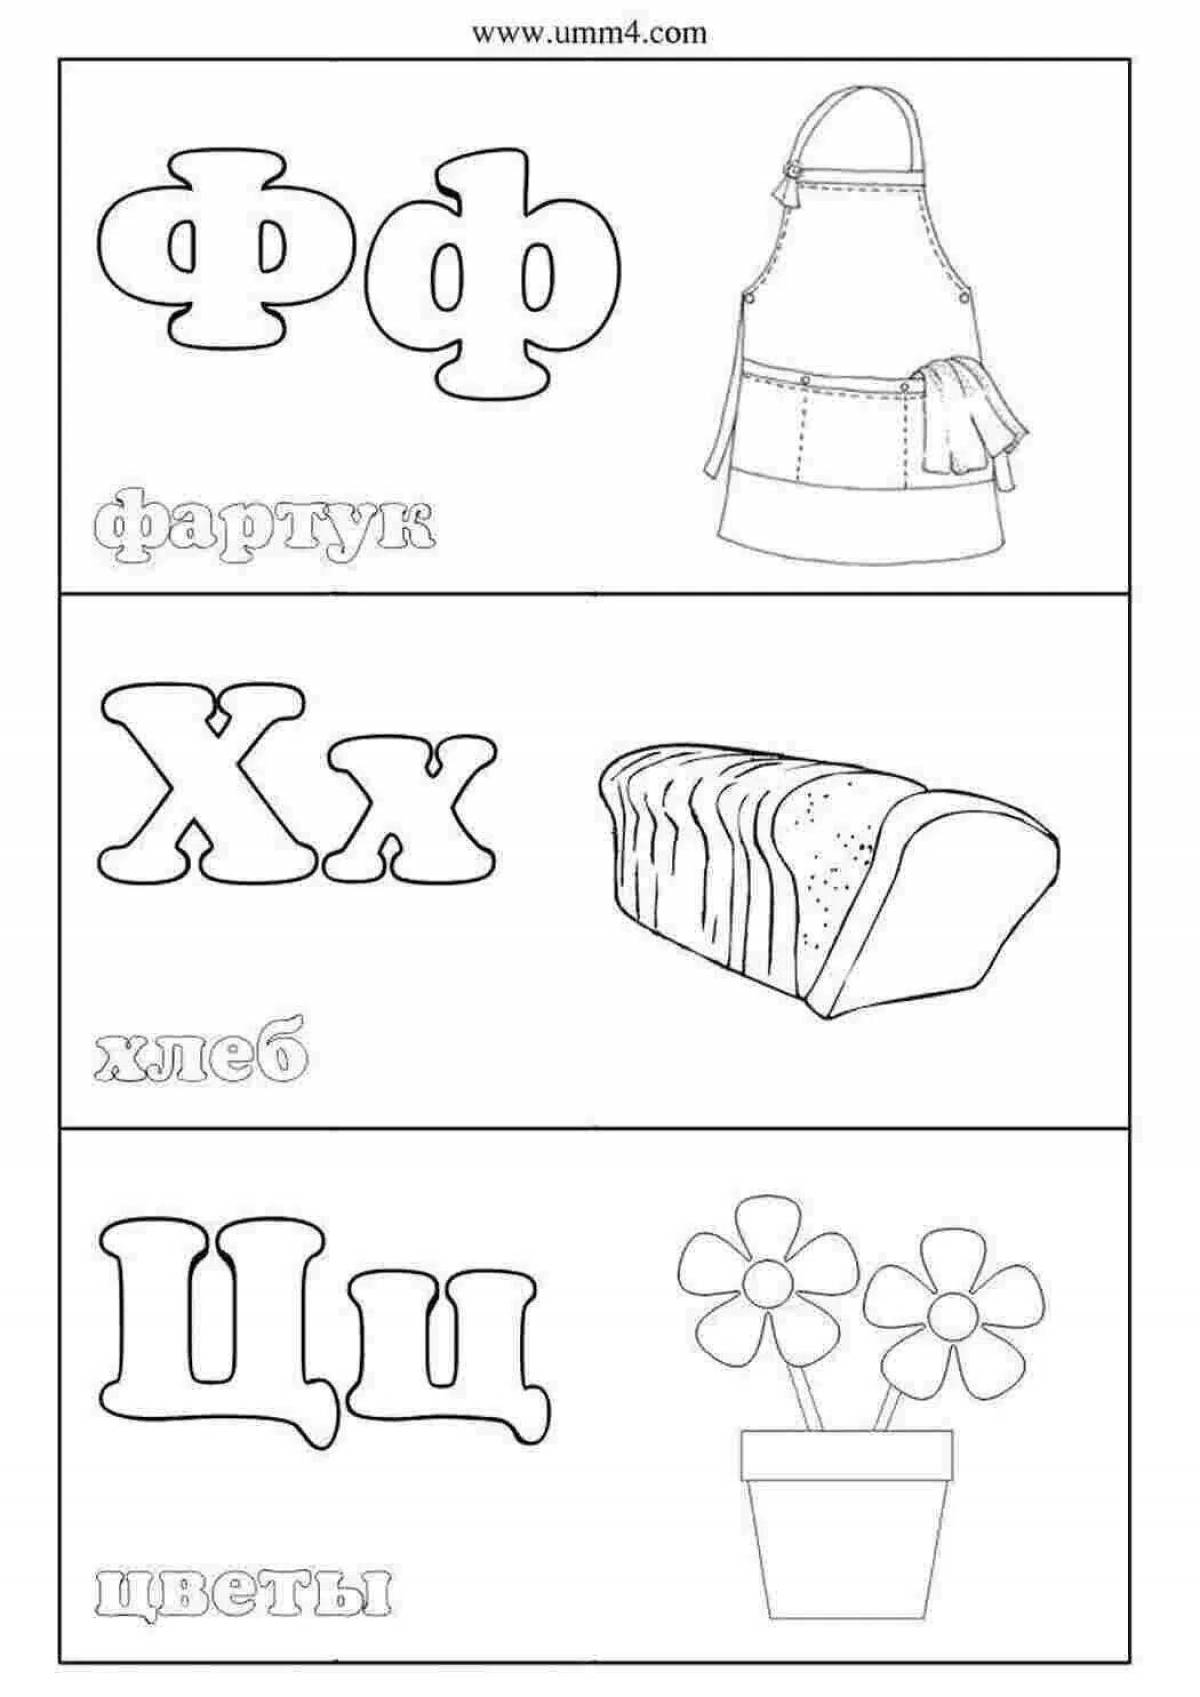 Colorful coloring page with russian alphabet